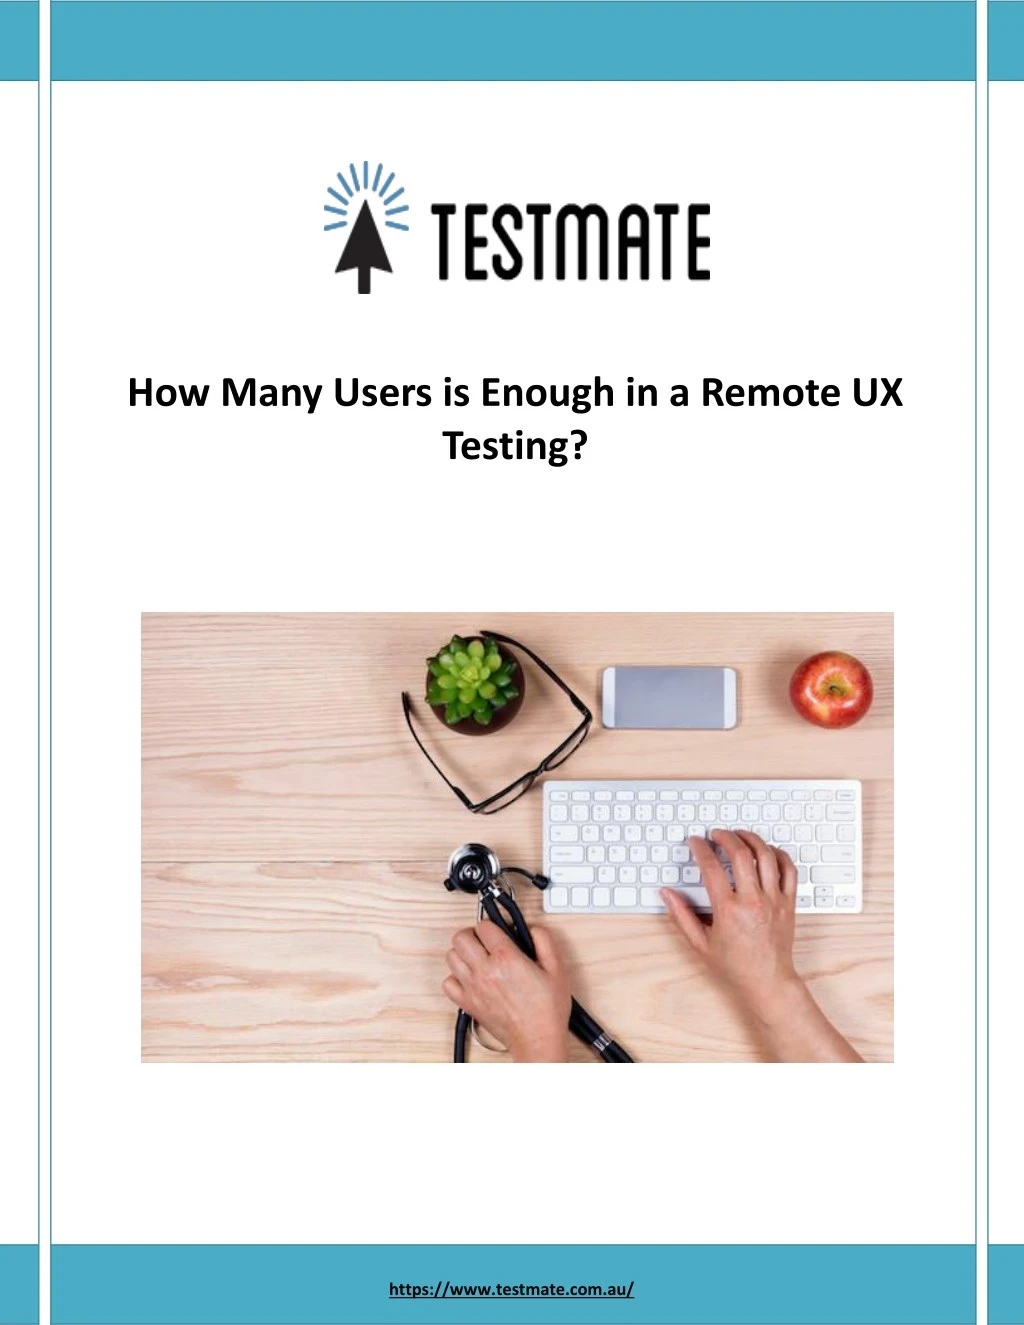 how many users is enough in a remote ux testing